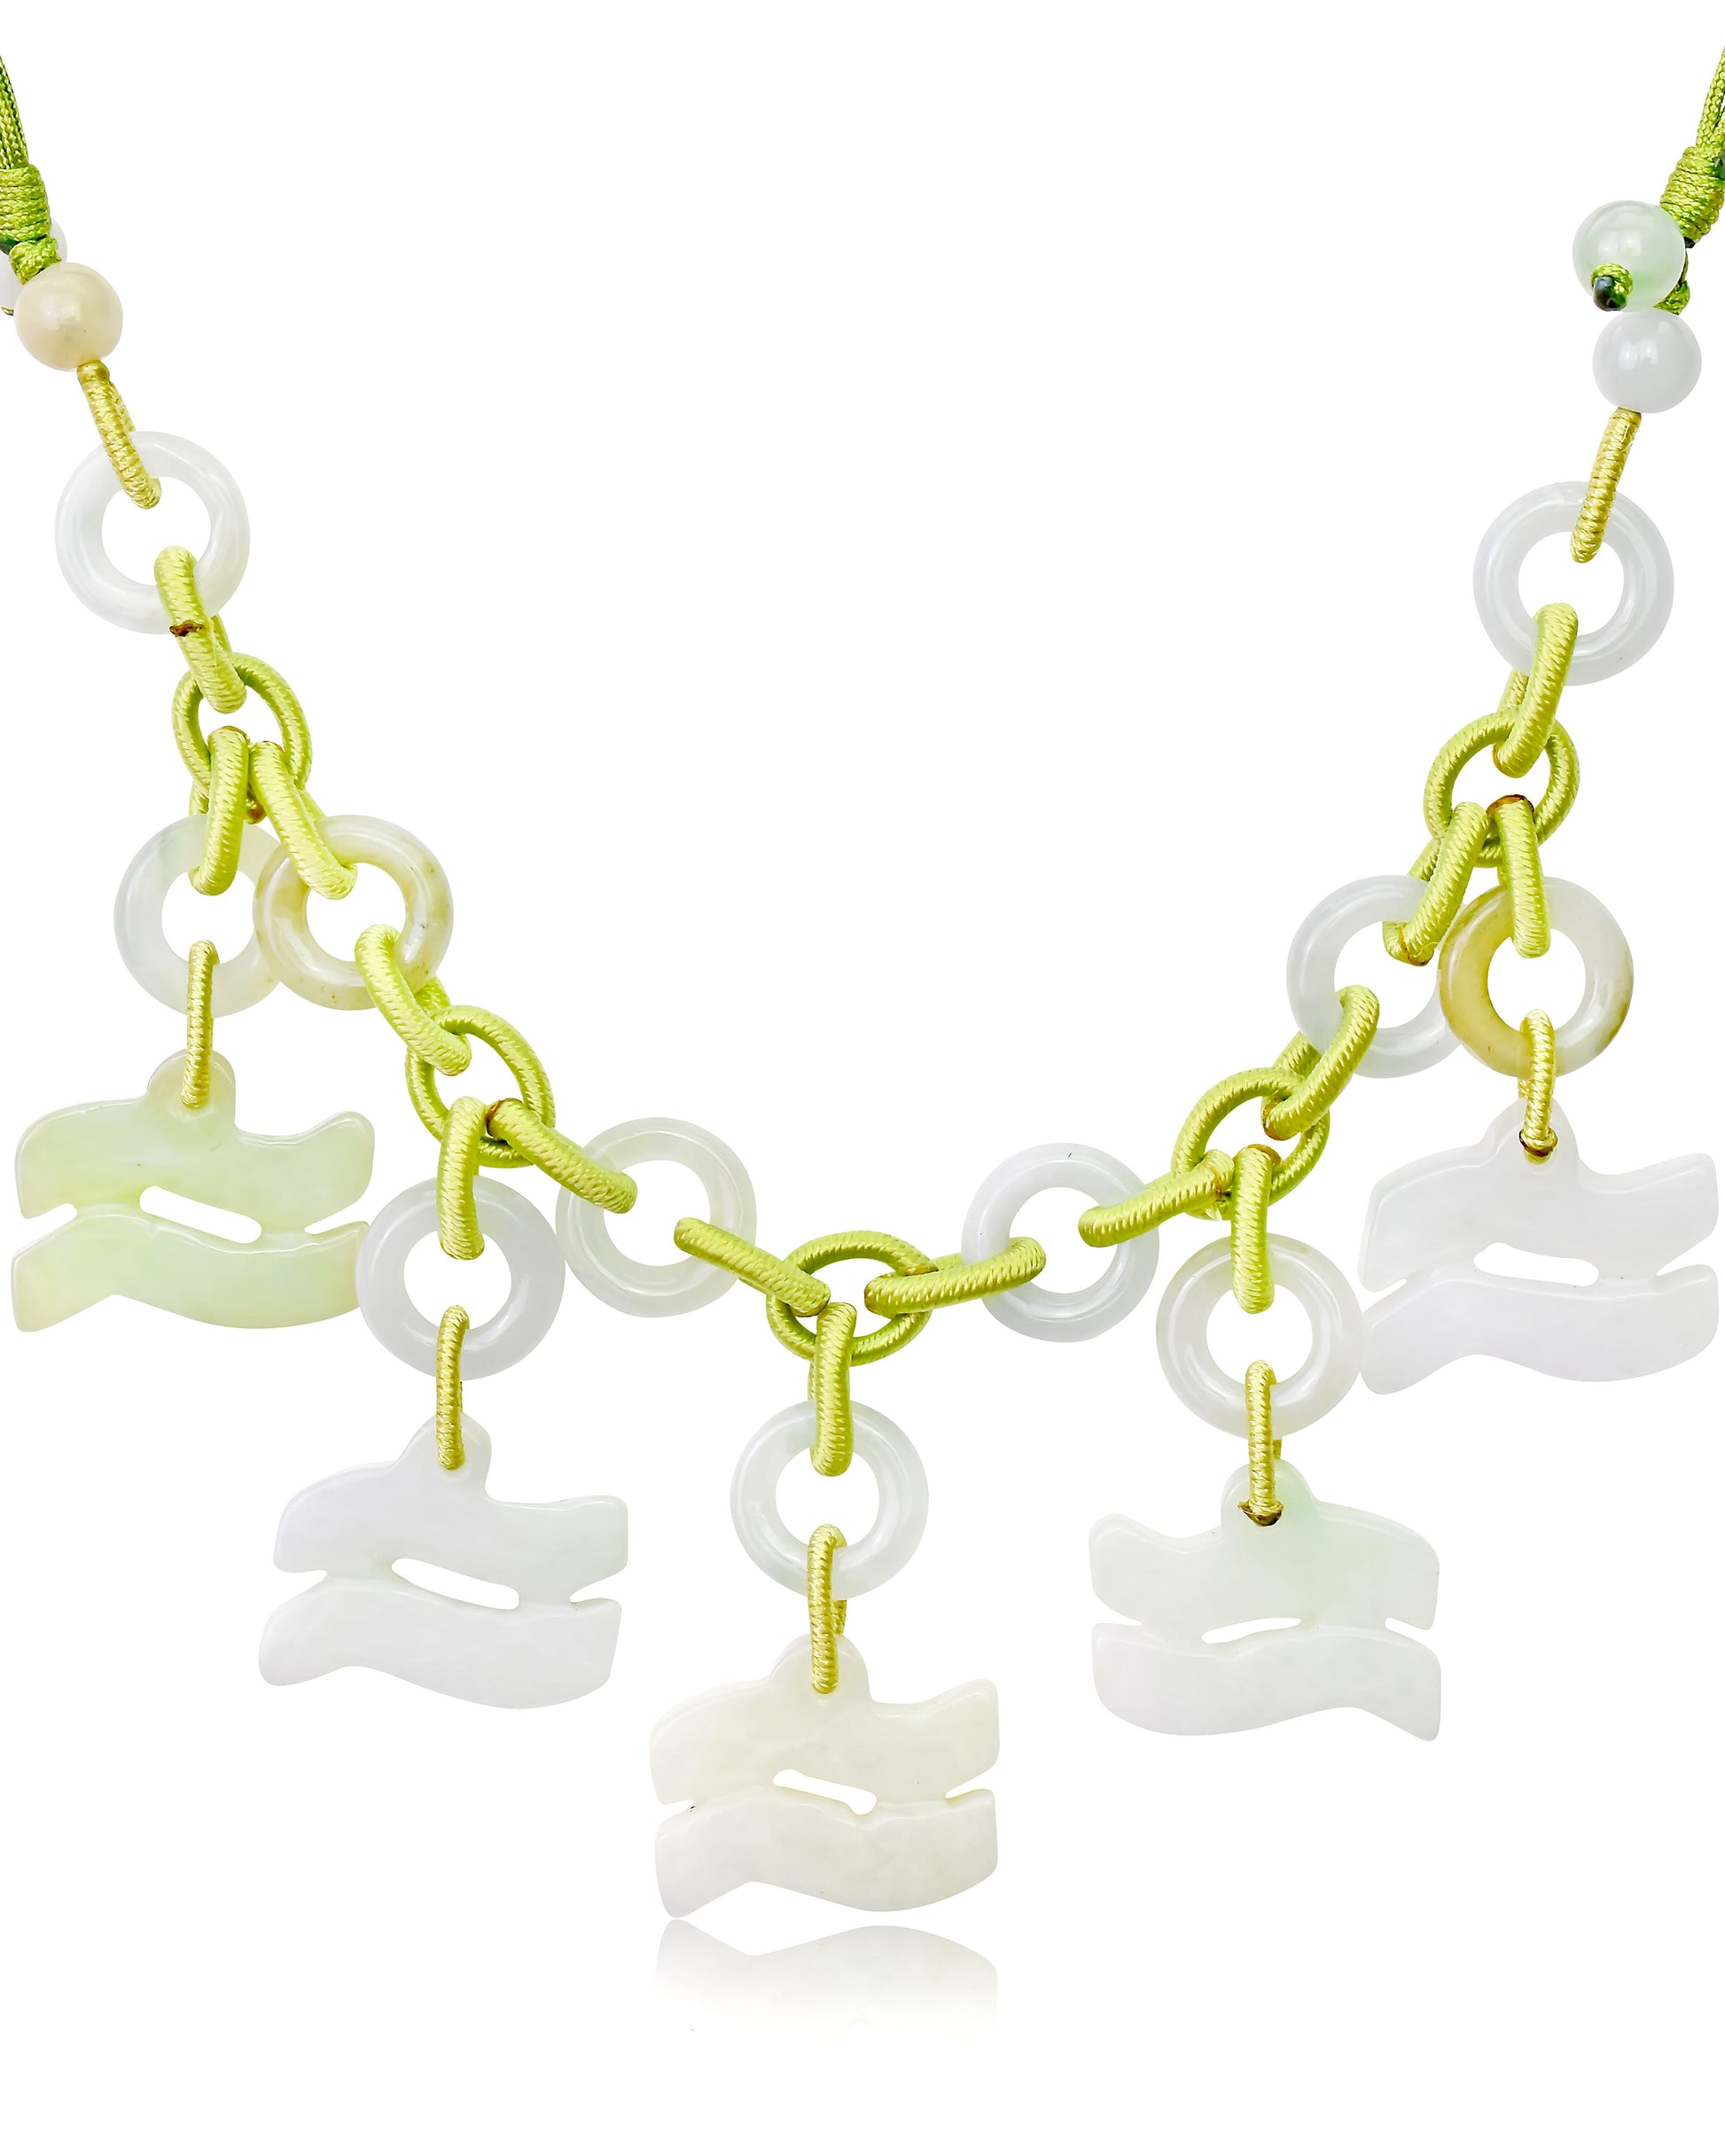 Aquarius Astrology Handmade Jade Necklace Pendant made with Lime Cord